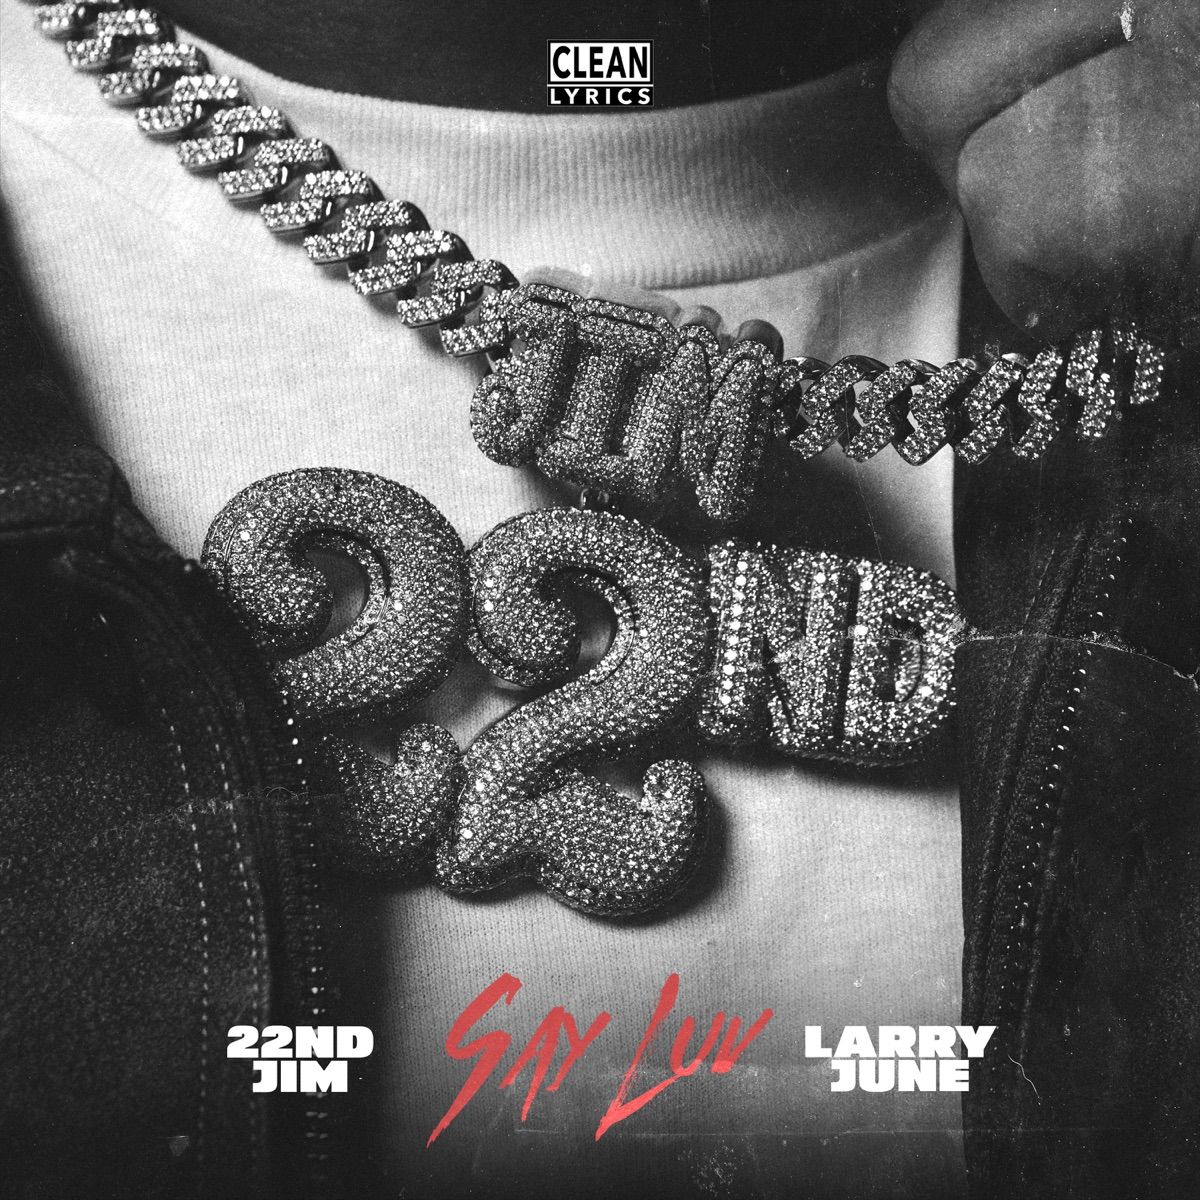 Say Luv by 22nd Jim & Larry June